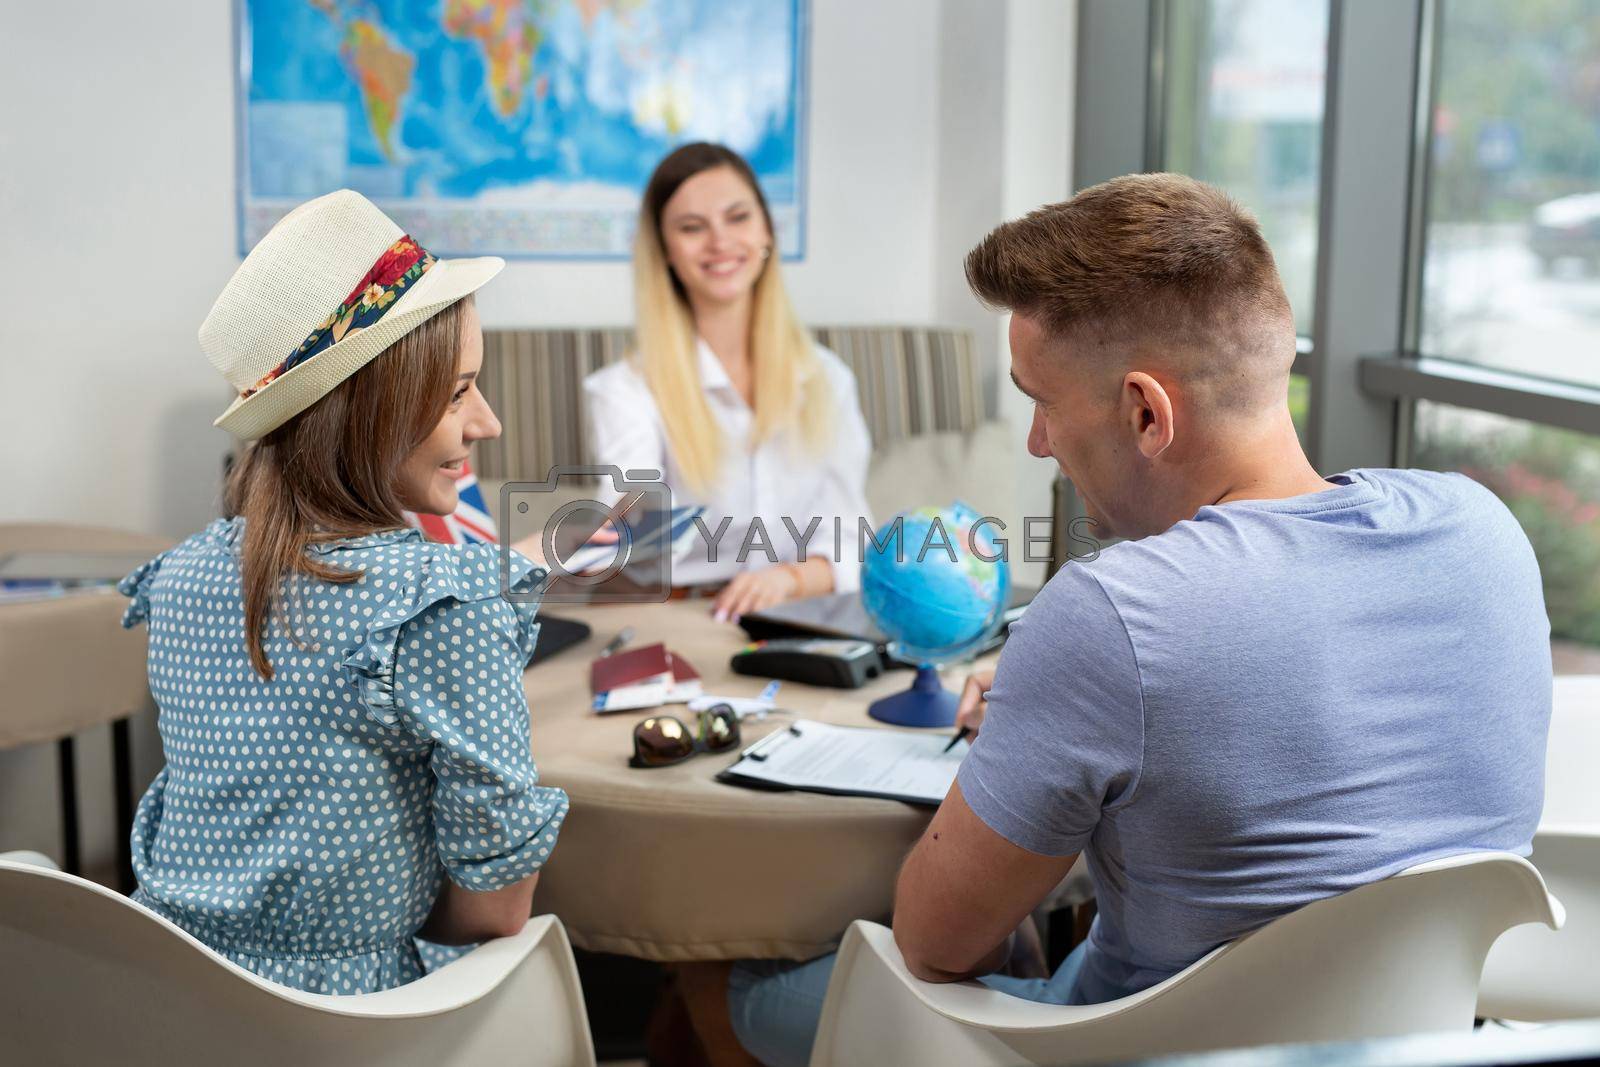 Royalty free image of Woman travel agent gives a couple passports with plane tickets in travel agency by StudioPeace